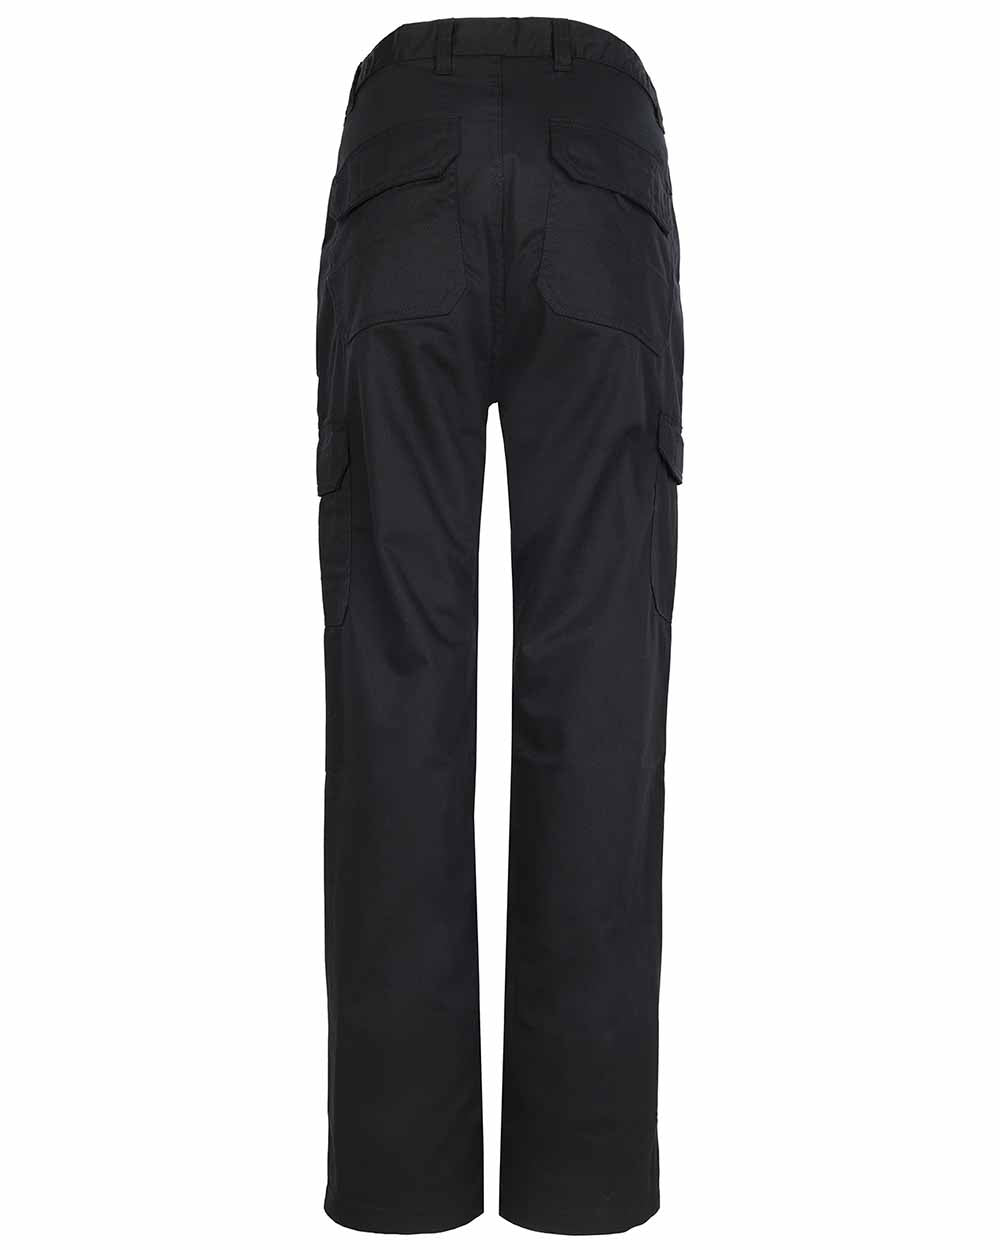 Black coloured Fort Workforce Trousers on white background 